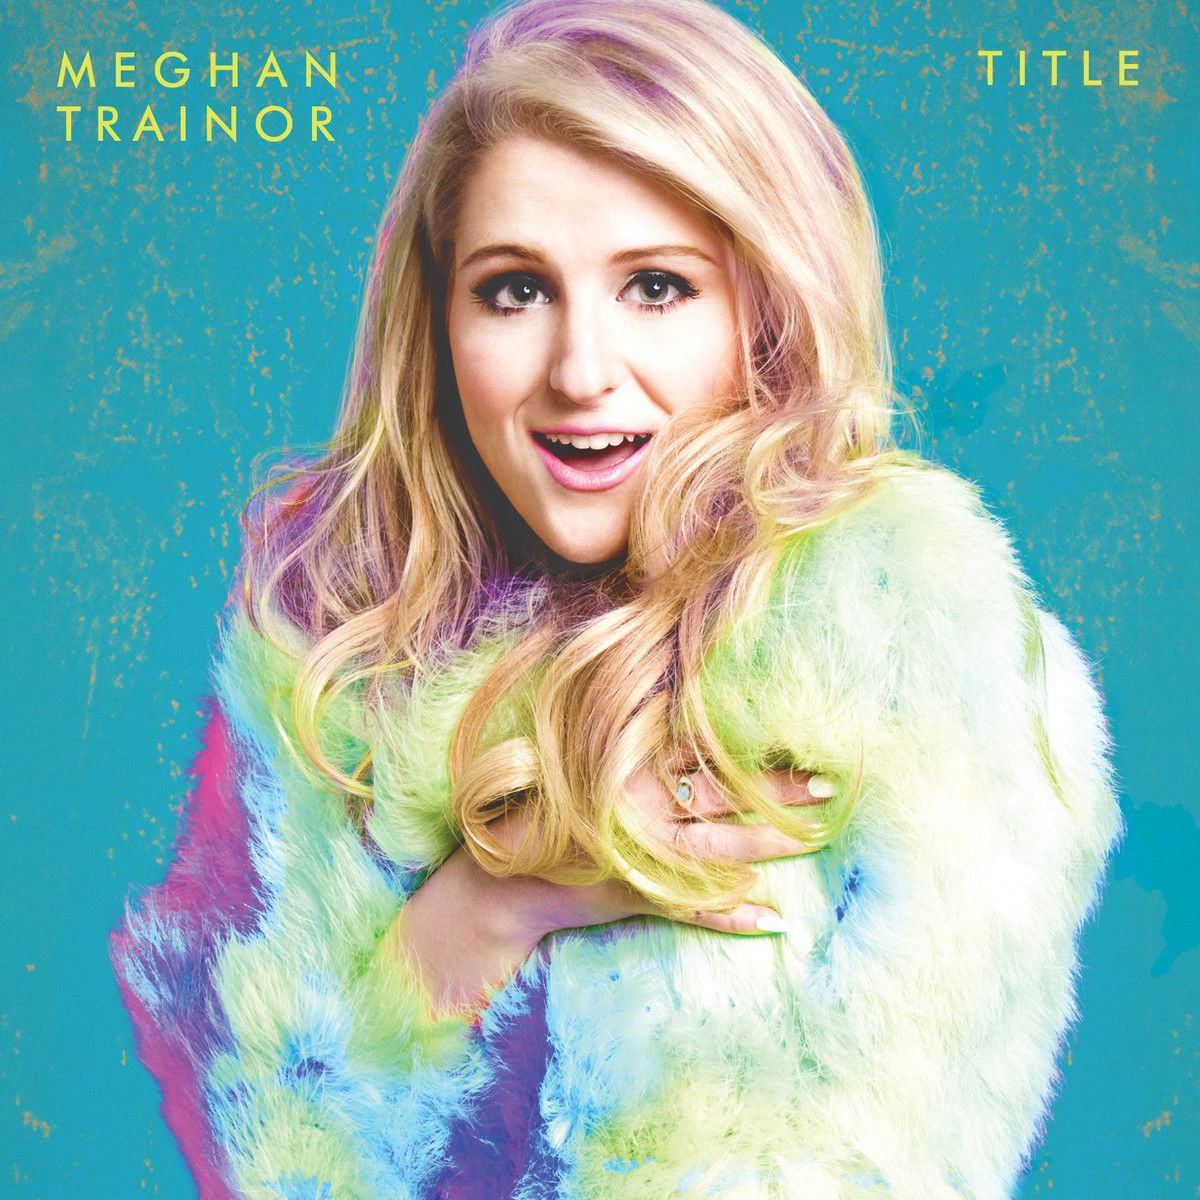 meghan_trainor - title_(deluxe_edition)